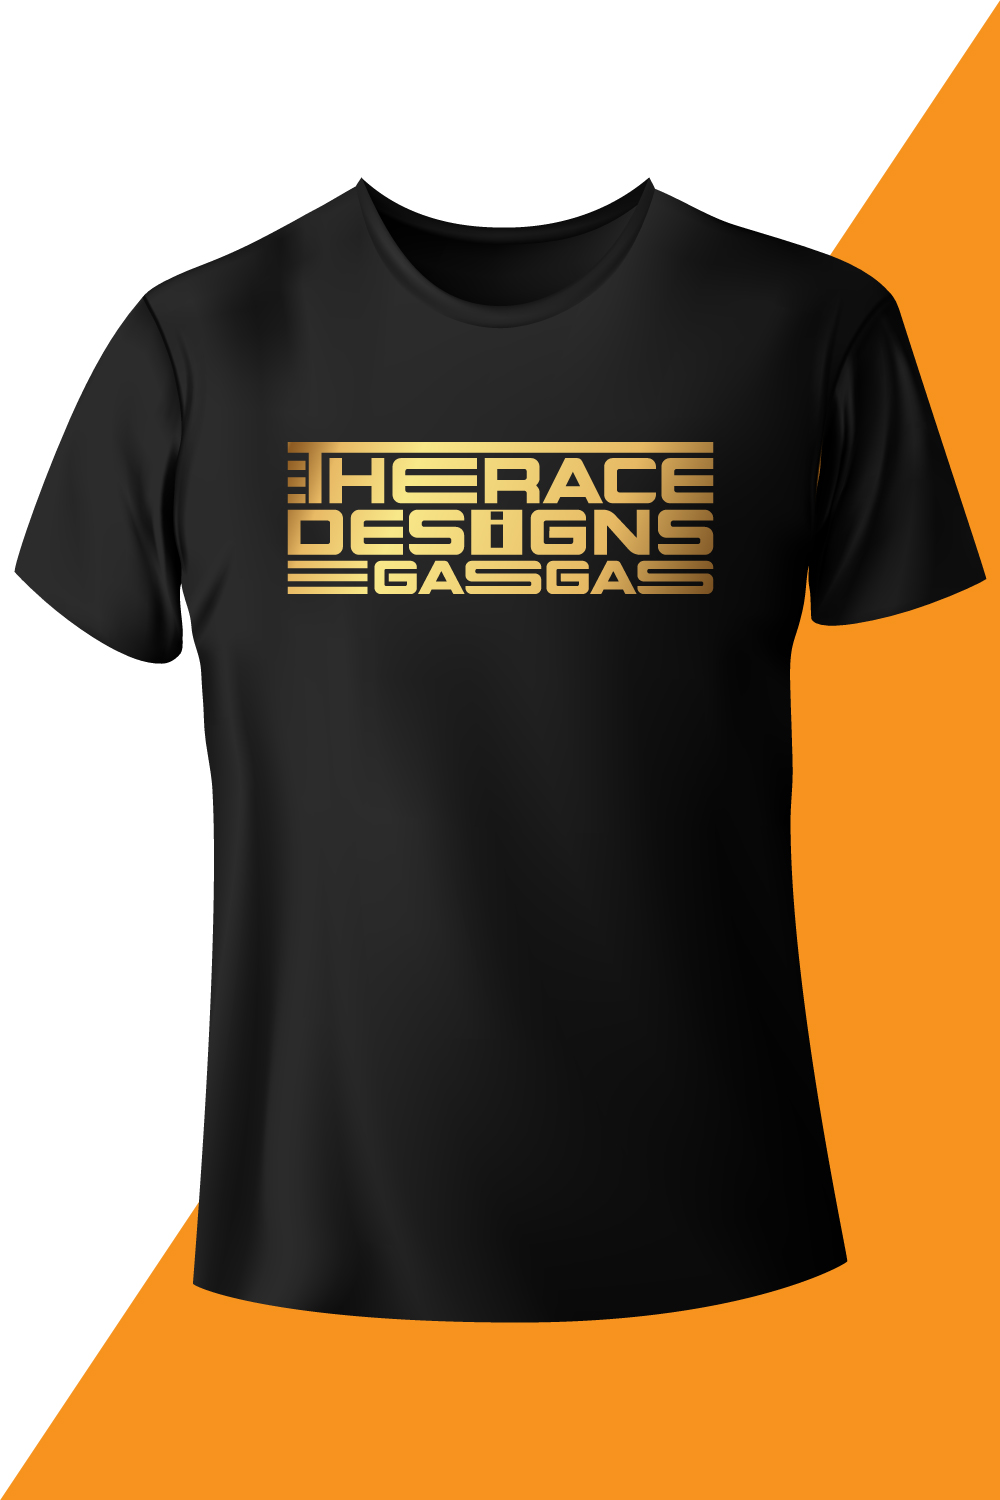 Image of a black t-shirt with beautiful Therace designs gasgas print